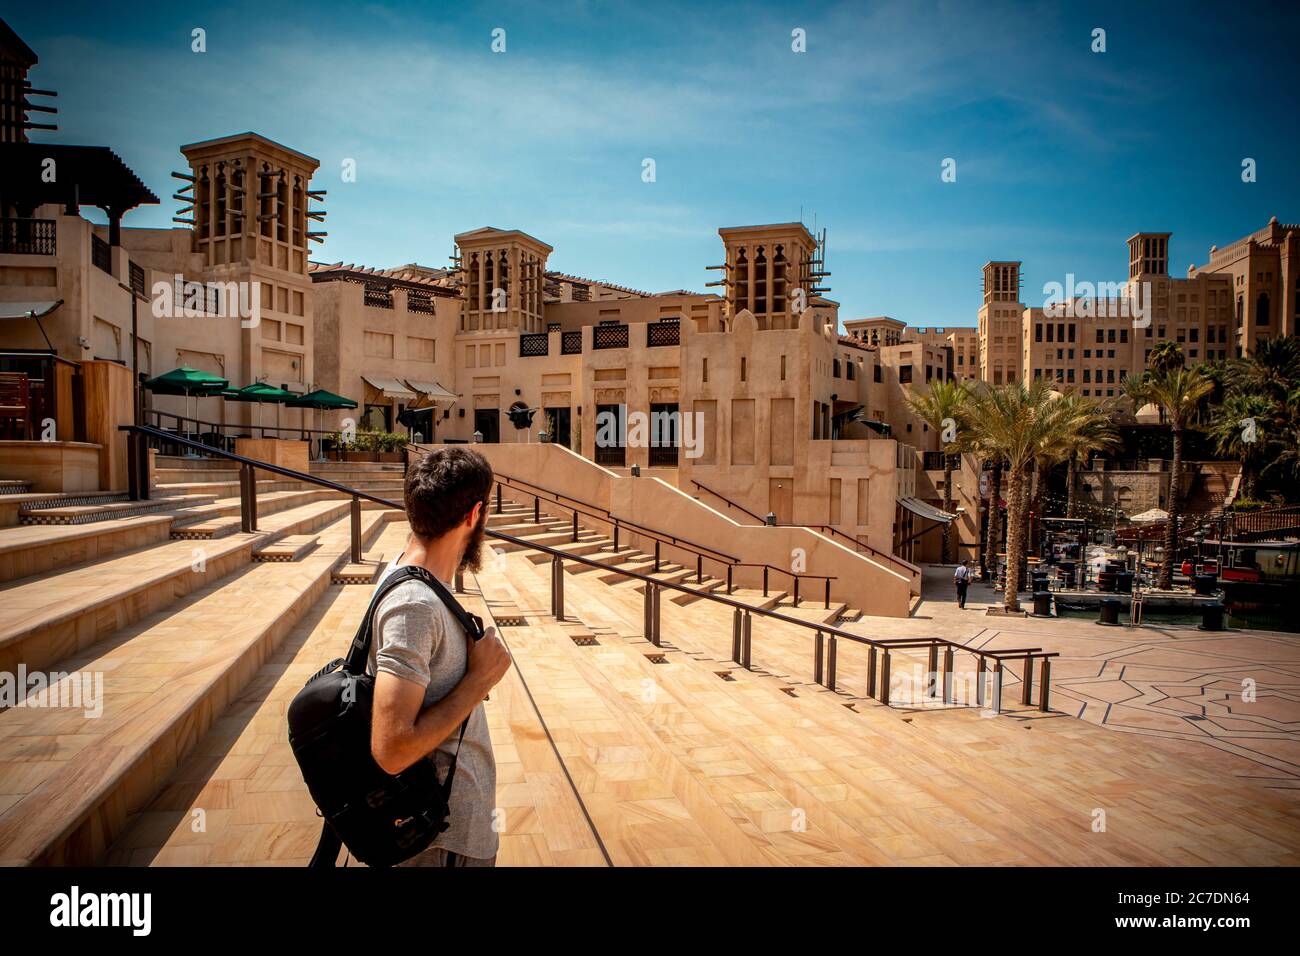 Person standing on the stairs of Madinat Jumeirah Resort under a clear blue sky in Dubai, UAE Stock Photo